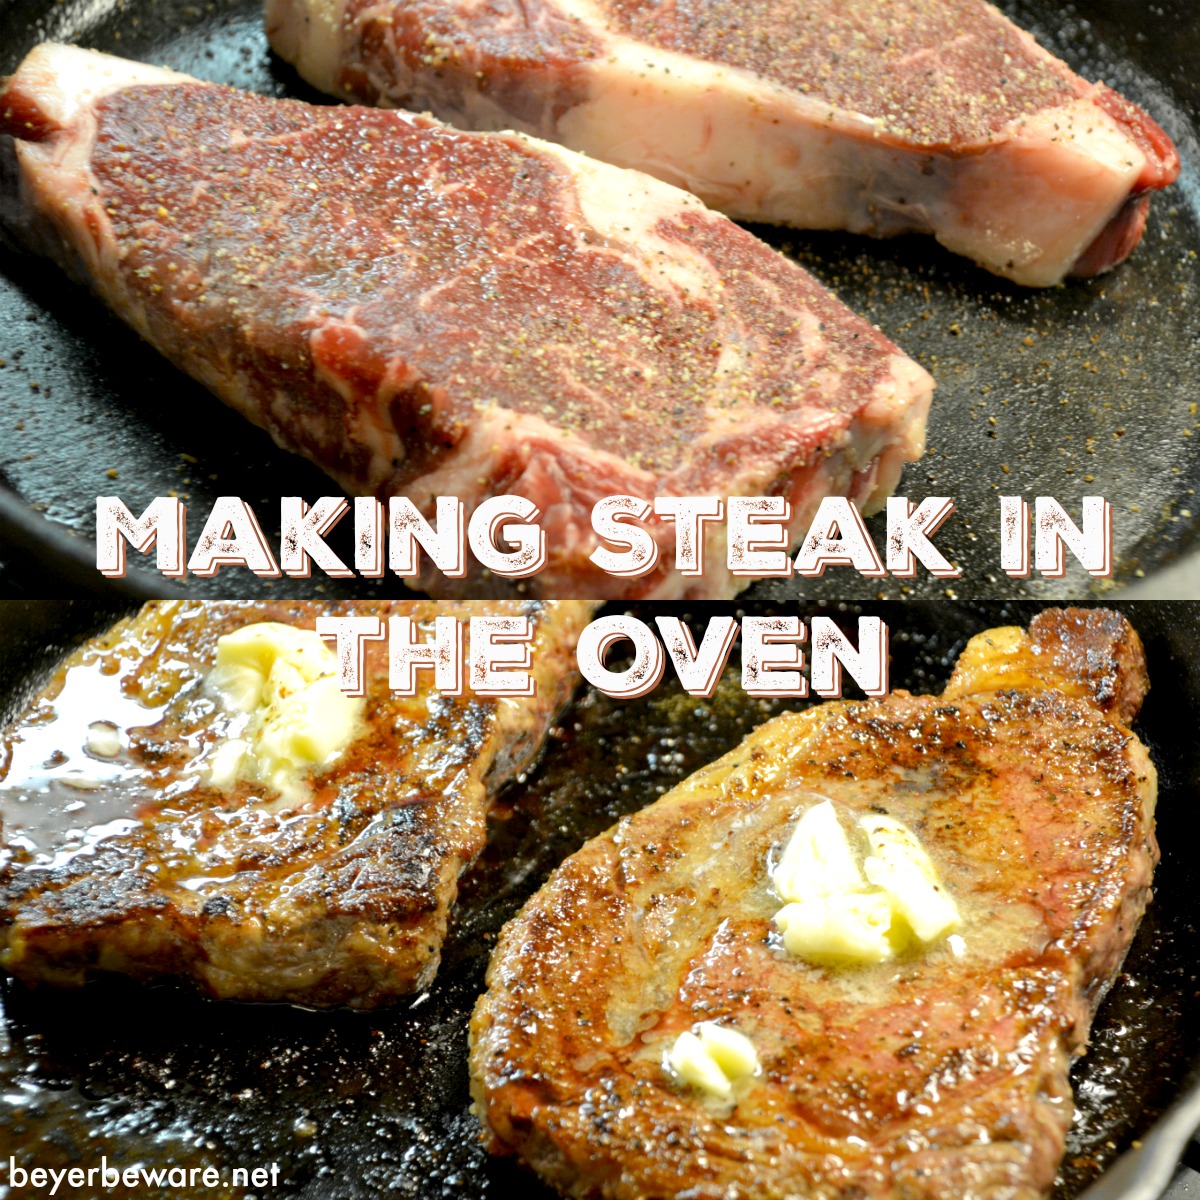 Steaks don't have to be just made on the grill. Juicy steaks can be made inside too. See how to make a steak on the stove and in the oven.